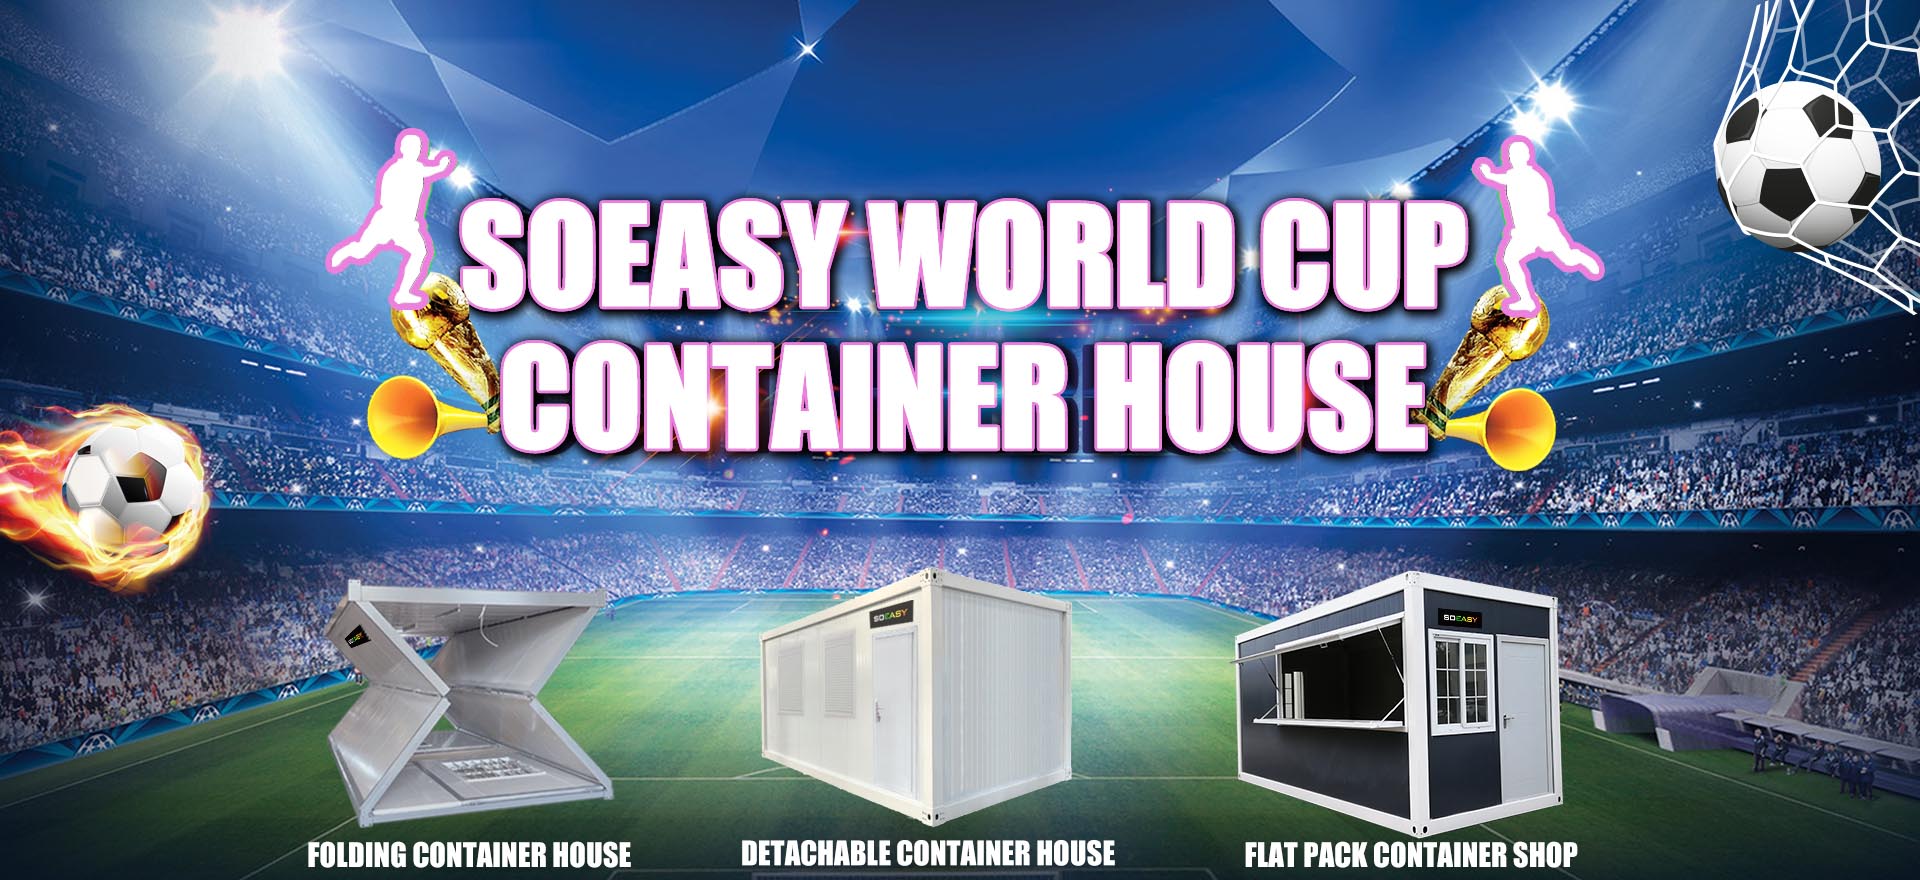 2022 Soeasy World Cup Container House